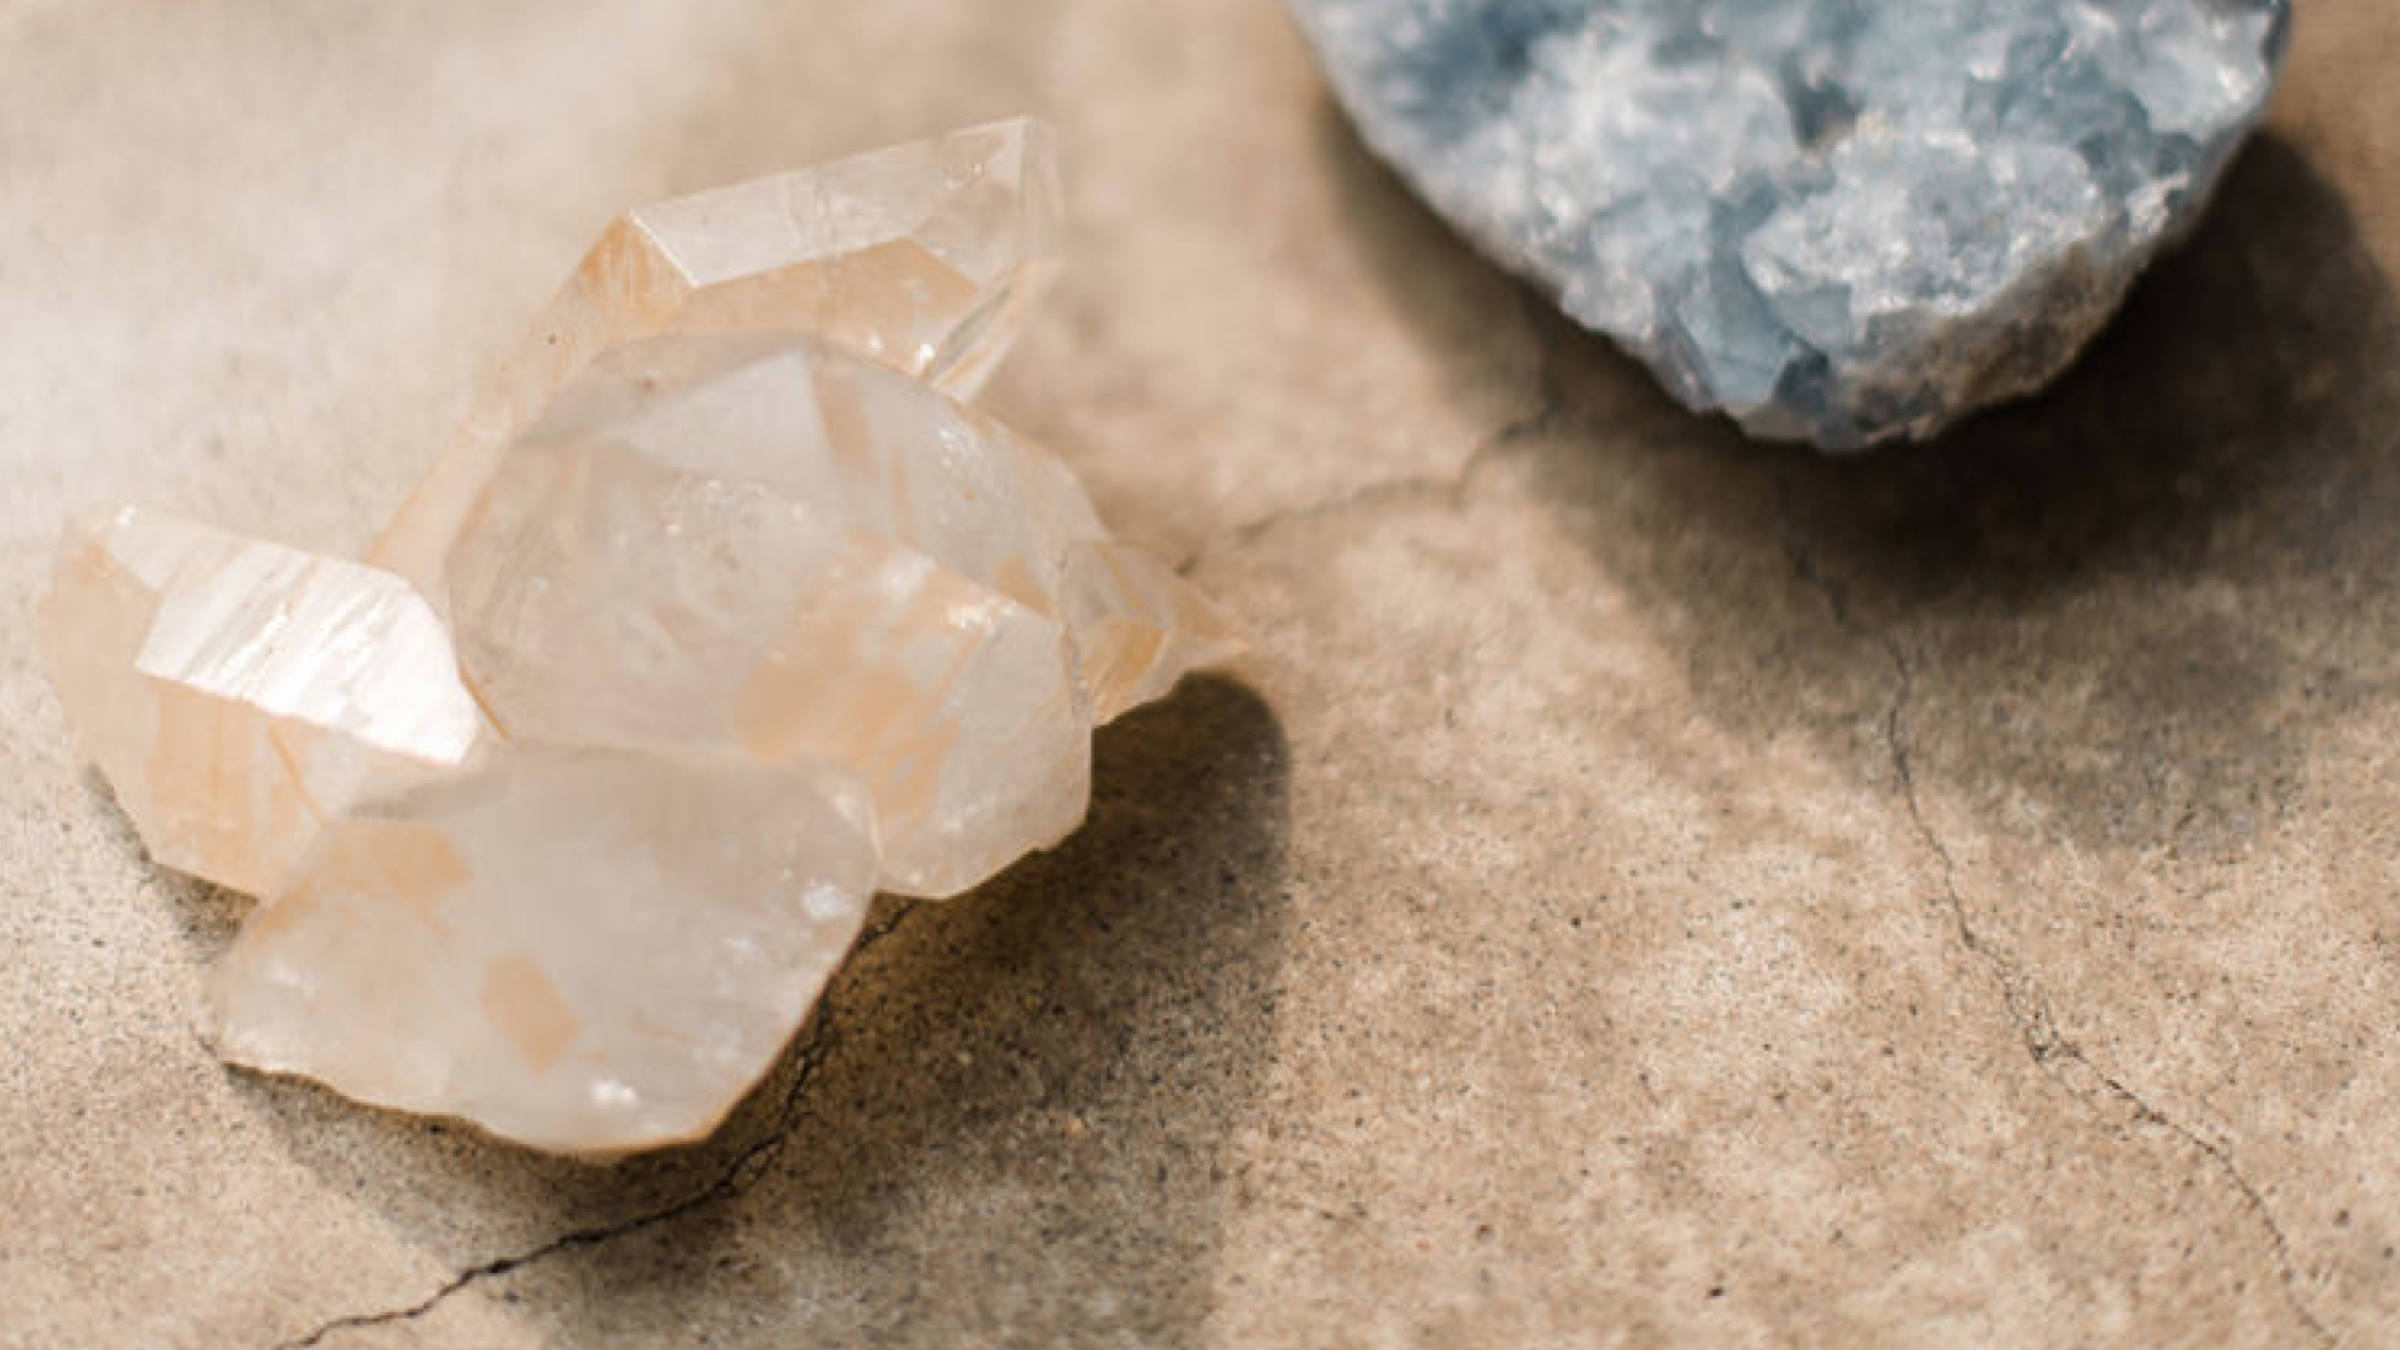 These Are The Best Crystals to Manifest With in 2022